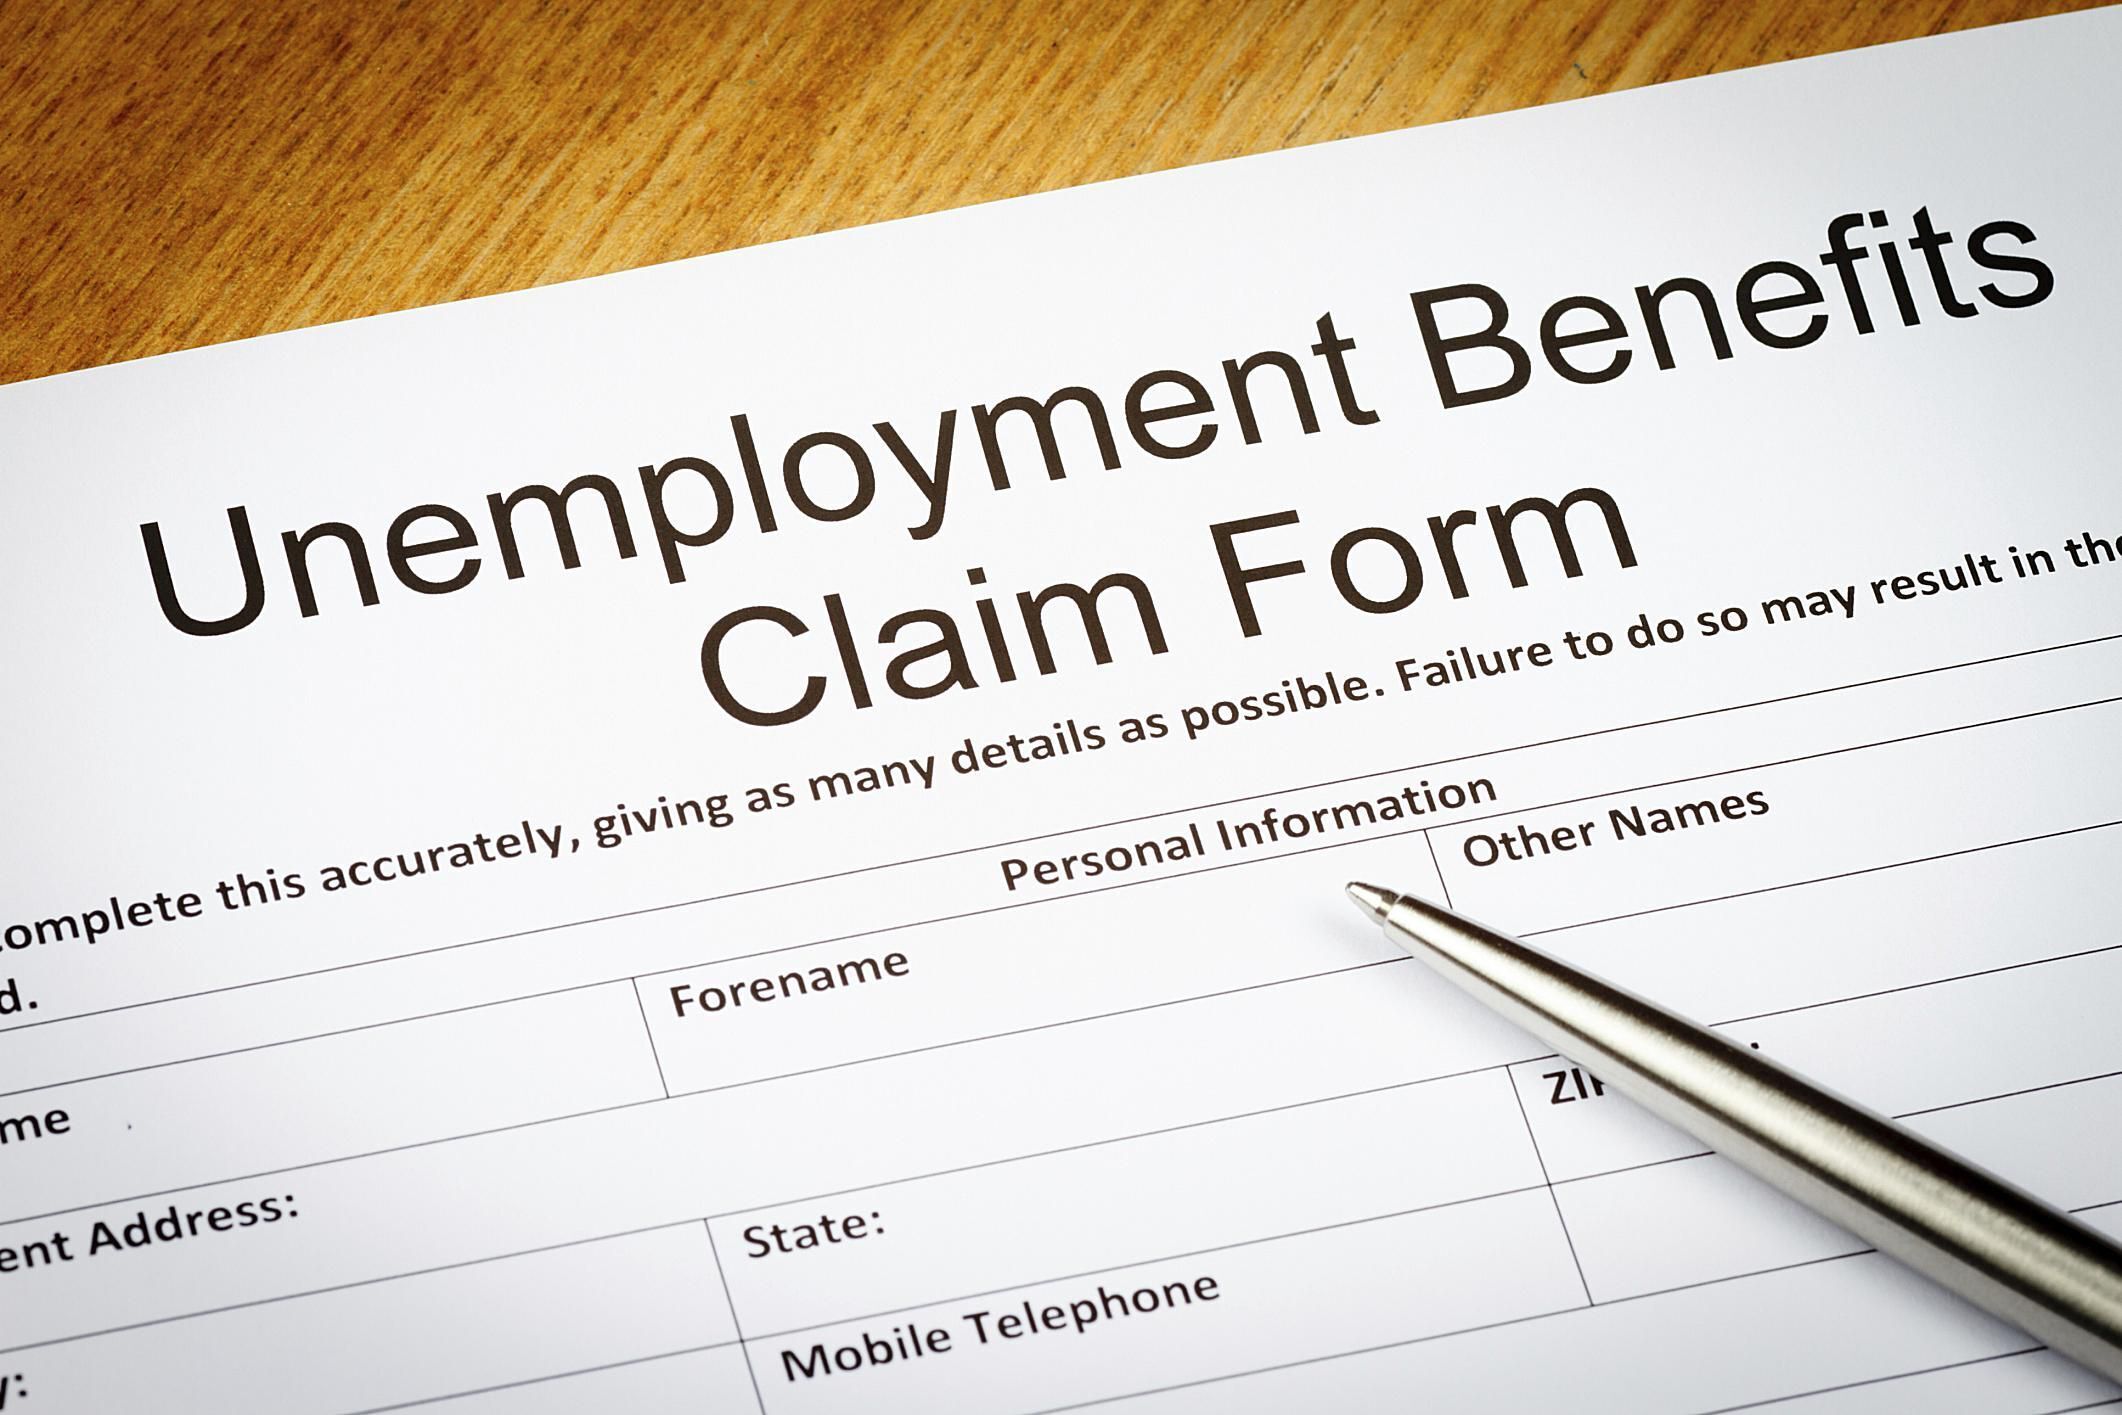 Research finds that extended and ‘enhanced’ unemployment benefits